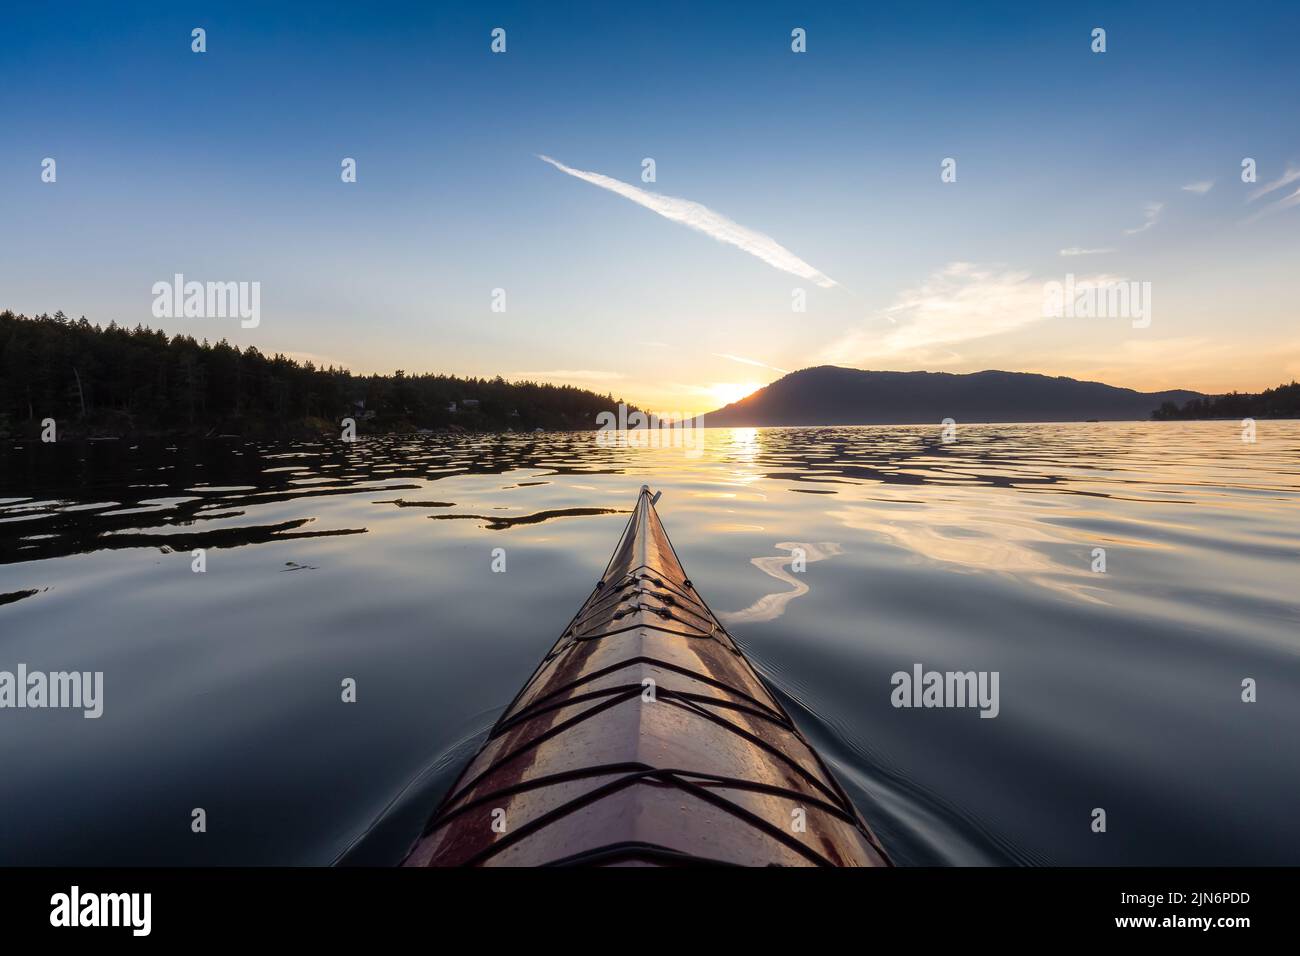 Sea Kayak paddling in the Pacific Ocean. Colorful Sunset Sky. Stock Photo